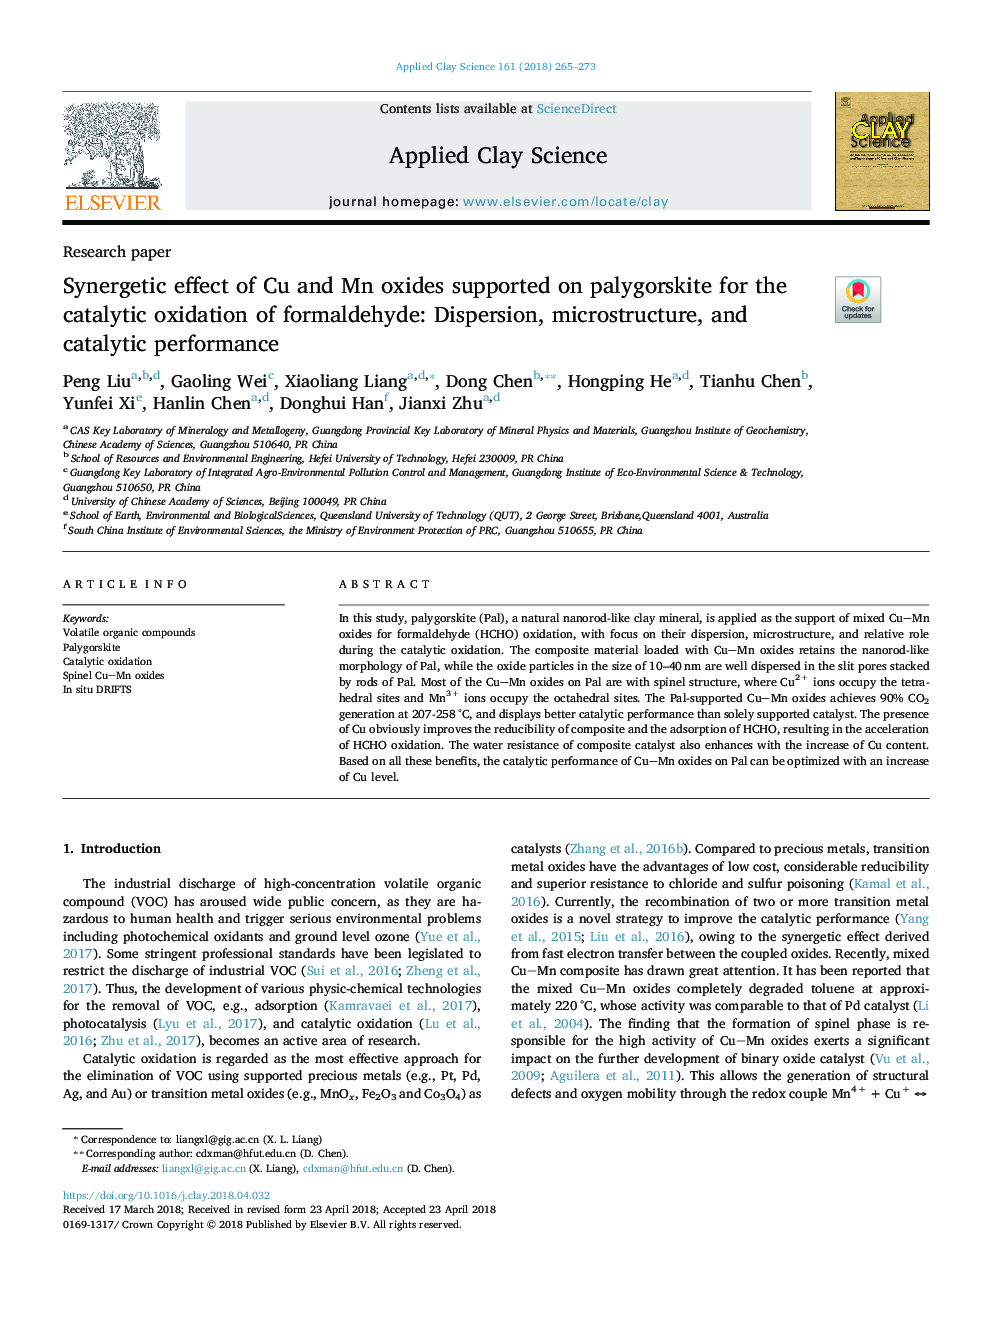 Synergetic effect of Cu and Mn oxides supported on palygorskite for the catalytic oxidation of formaldehyde: Dispersion, microstructure, and catalytic performance